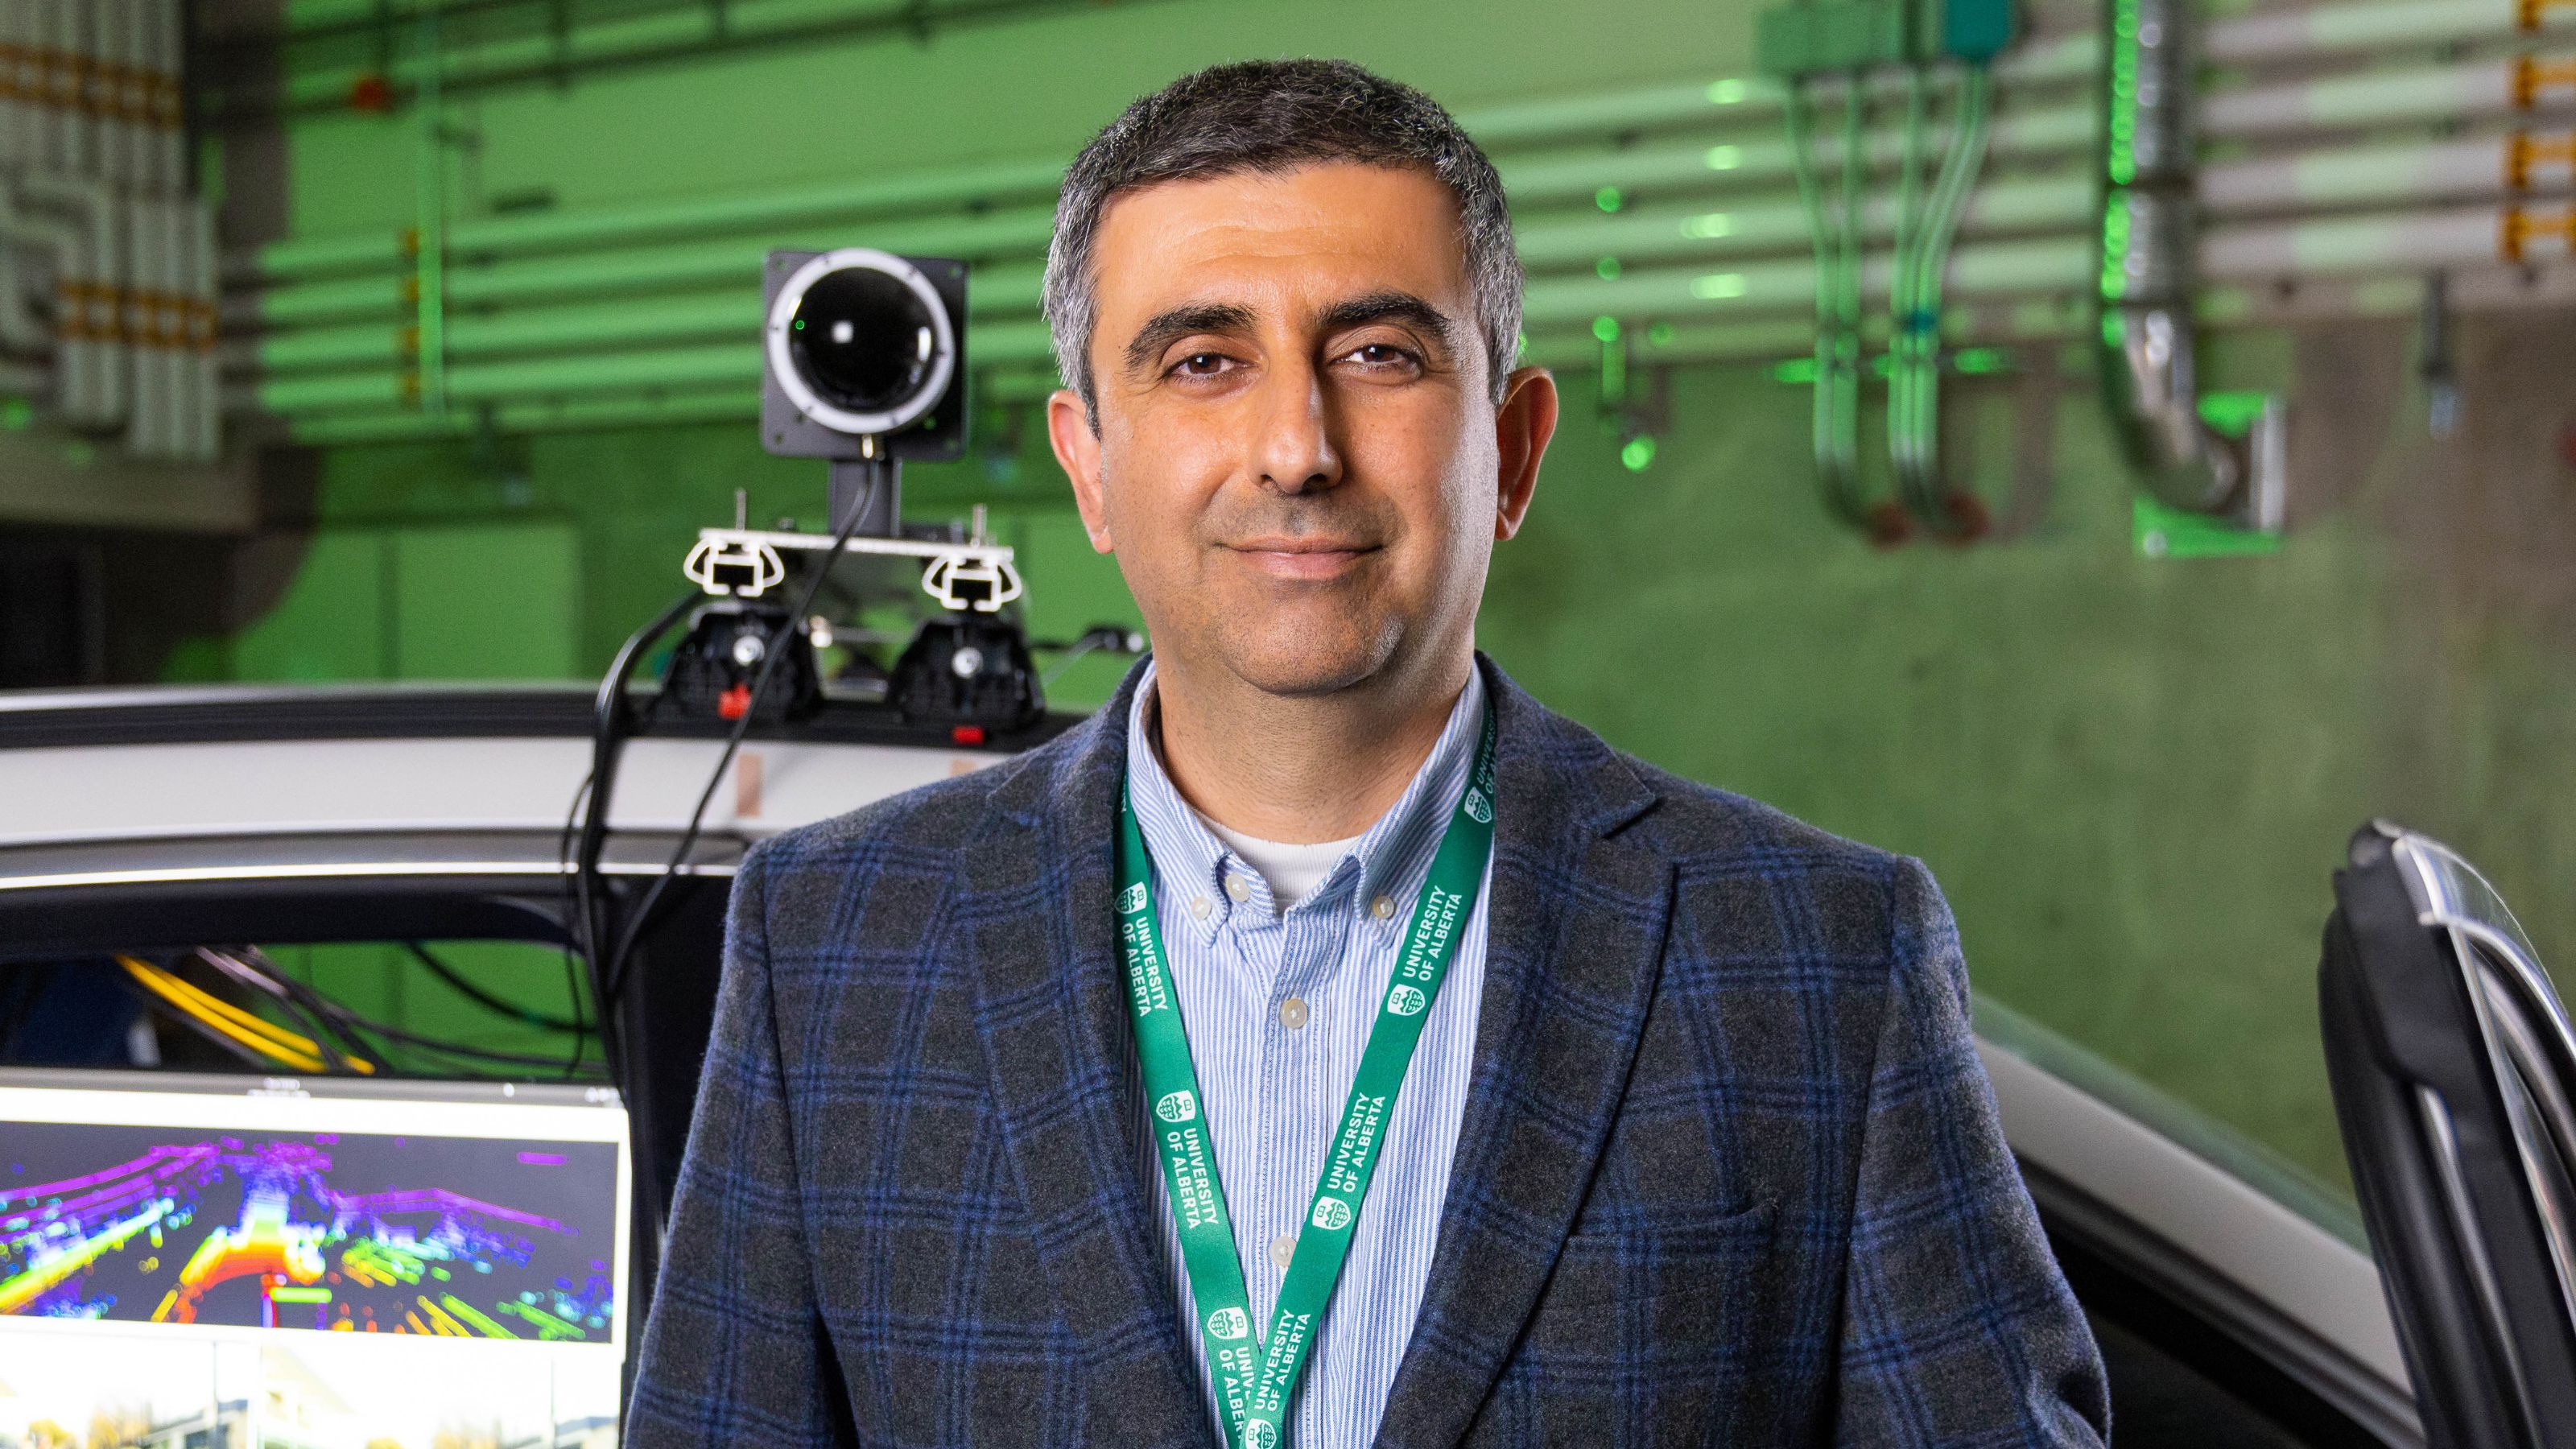 Ehsan Hashemi, assistant professor in the Department of Mechanical Engineering at the University of Alberta and the director of the Networked Optimization, Diagnosis and Estimation Laboratory.